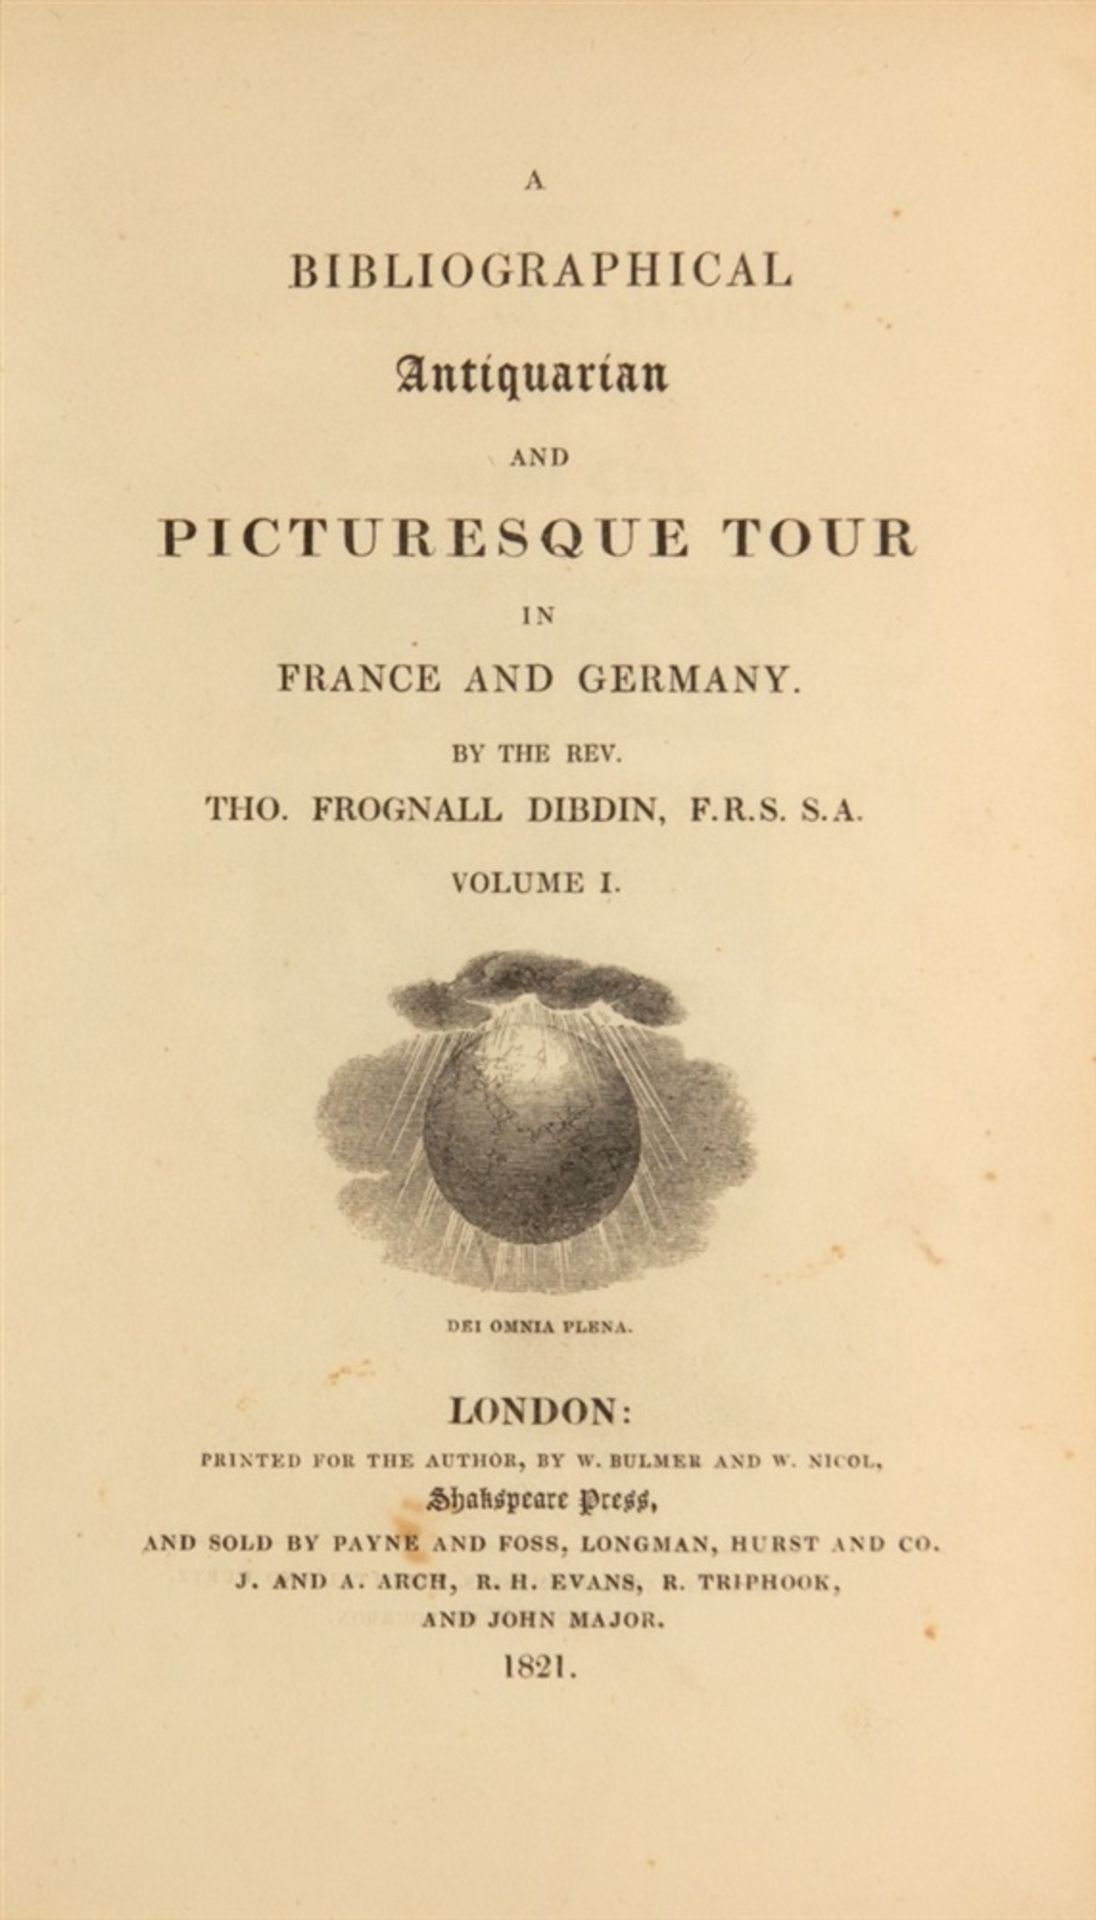 Dibdin, Thomas Frognall: A bibliographical antiquarian and picturesque tour in France and Germany. 3